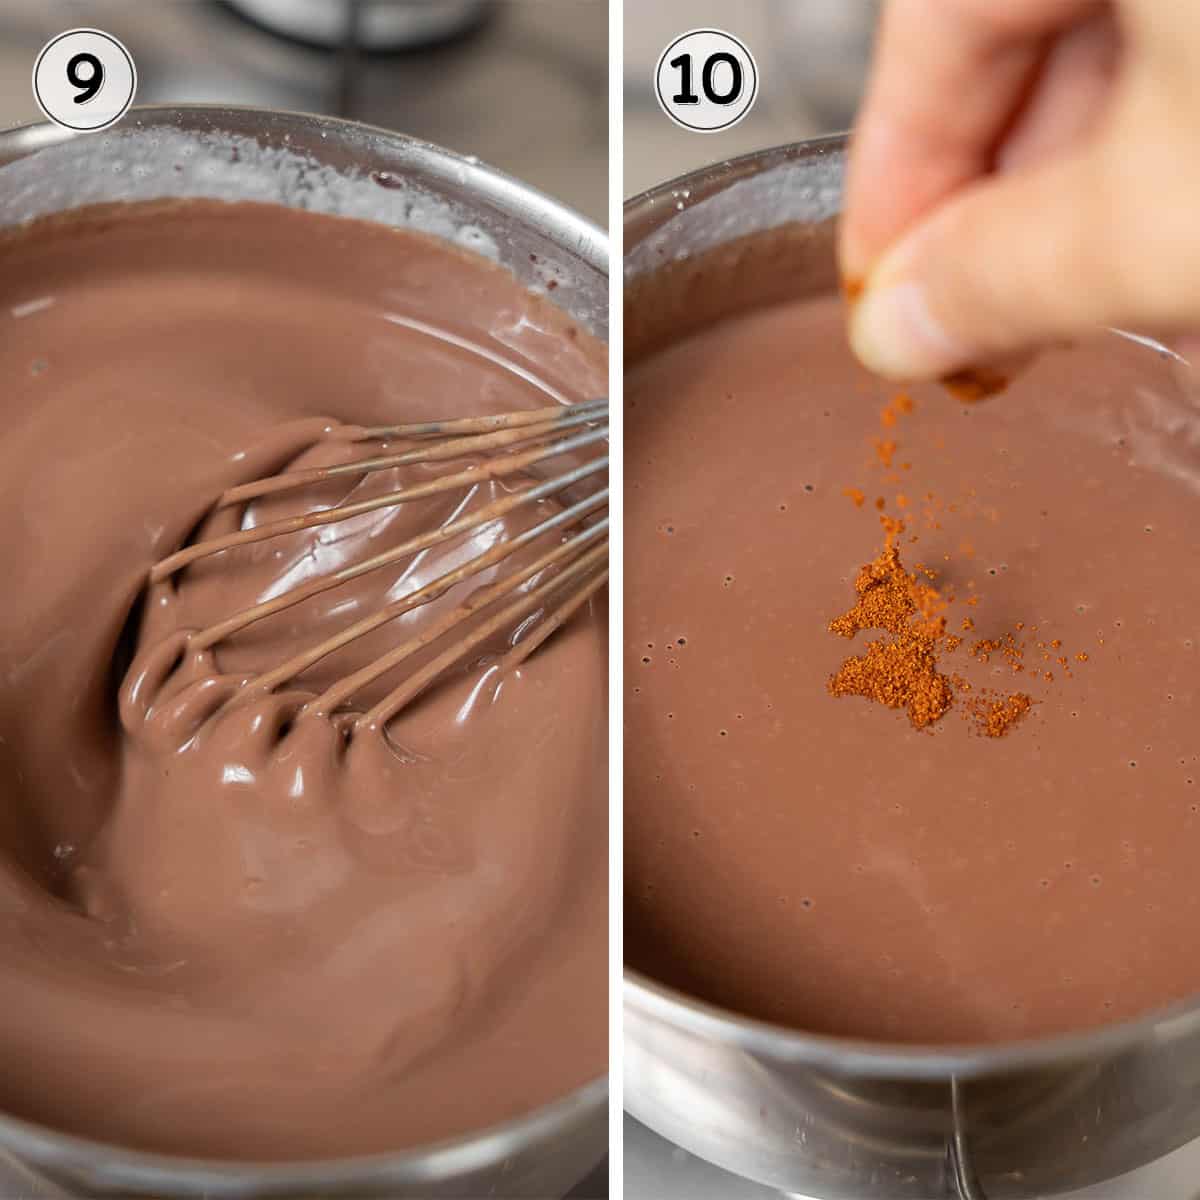 cooking the chocolate until thickened and adding a pinch of cayenne pepper.